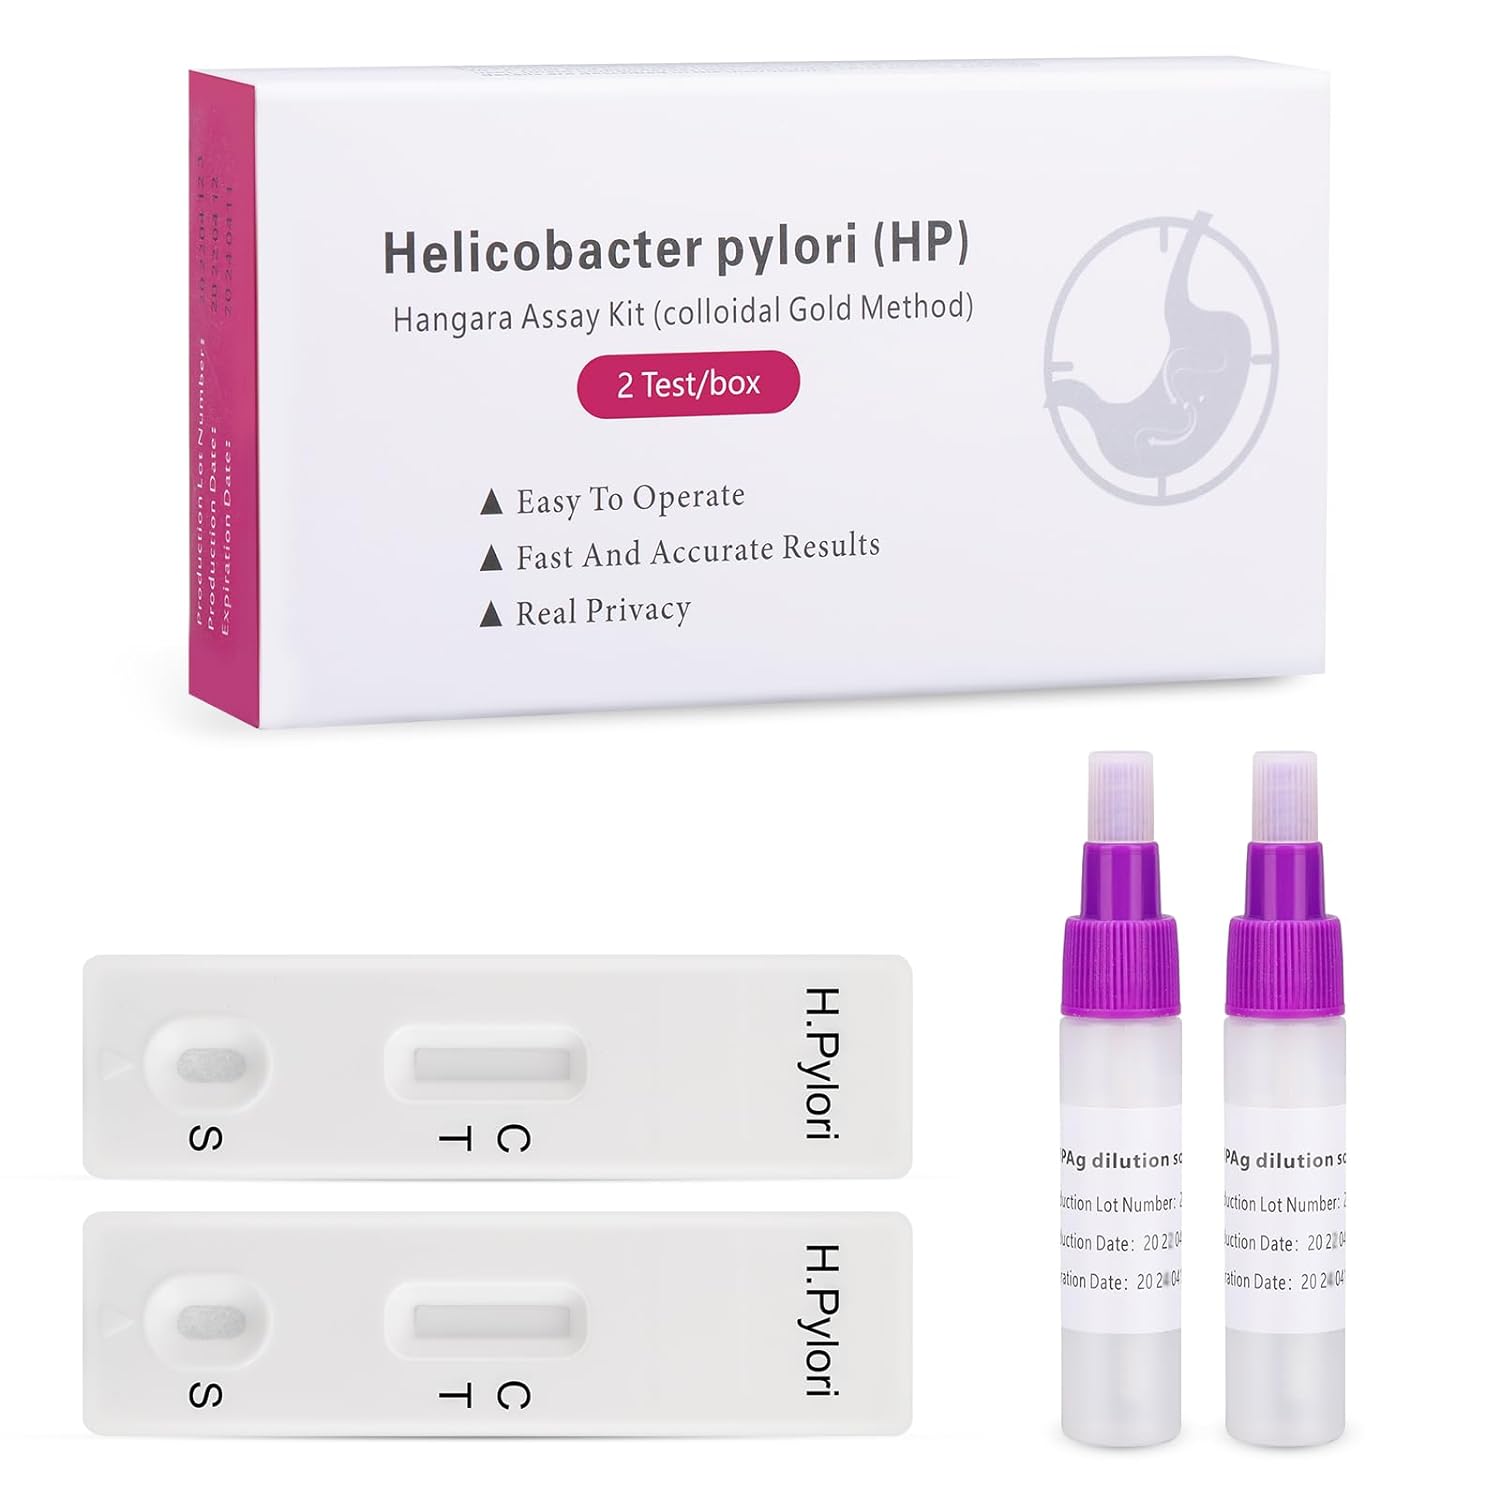 ROMTEST Helicobacter Pylori Stool Test Kits，at-Home H. Pylori Test kit eliminates The Need for appointments or Trips to Labs and clinics, Provides Accurate Results in 10-15 Minutes (Pack of 2)